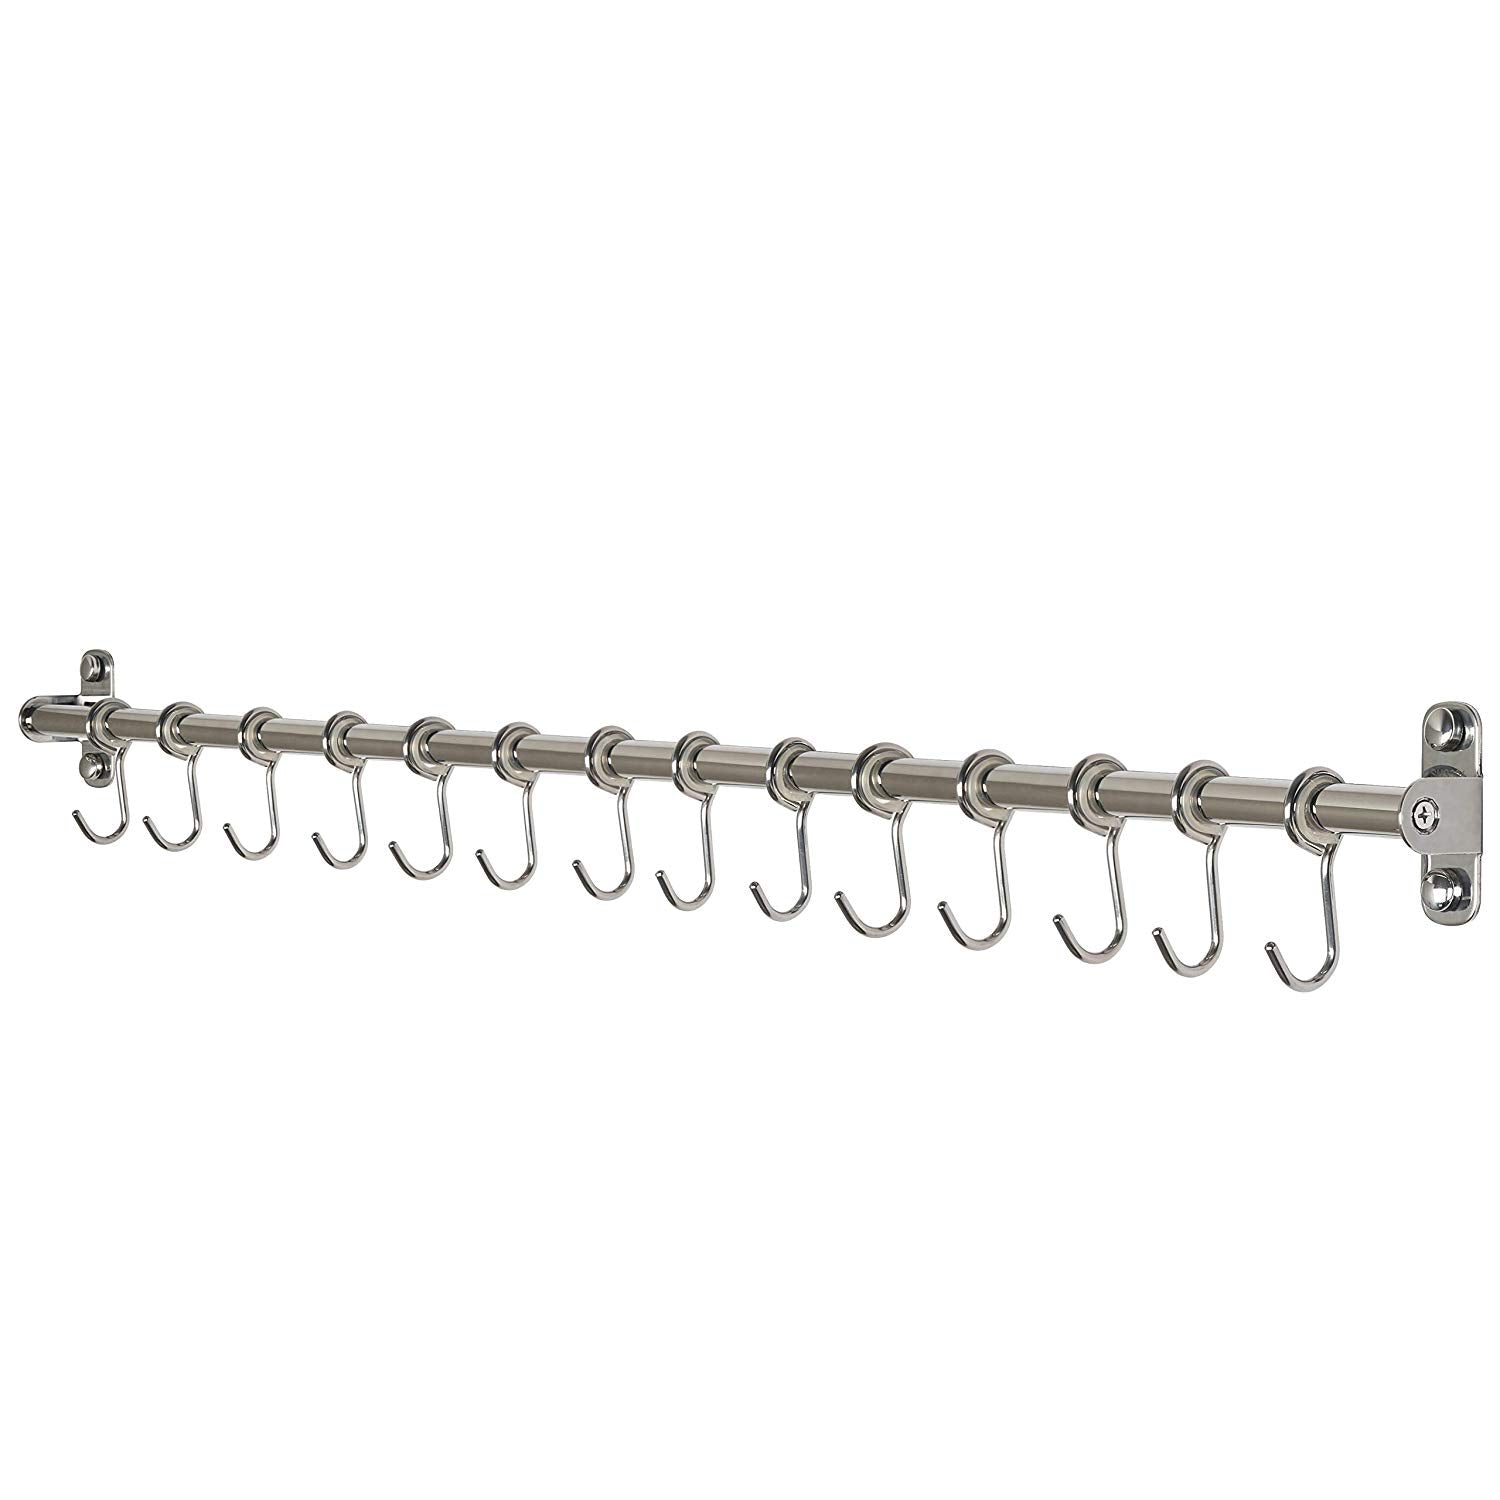 WEBI Kitchen Sliding Hooks, Solid Stainless Steel Hanging Rack Rail with 14 Utensil Removable S Hooks for Towel, Pot Pan, Spoon, Loofah, Bathrobe, Wall Mounted